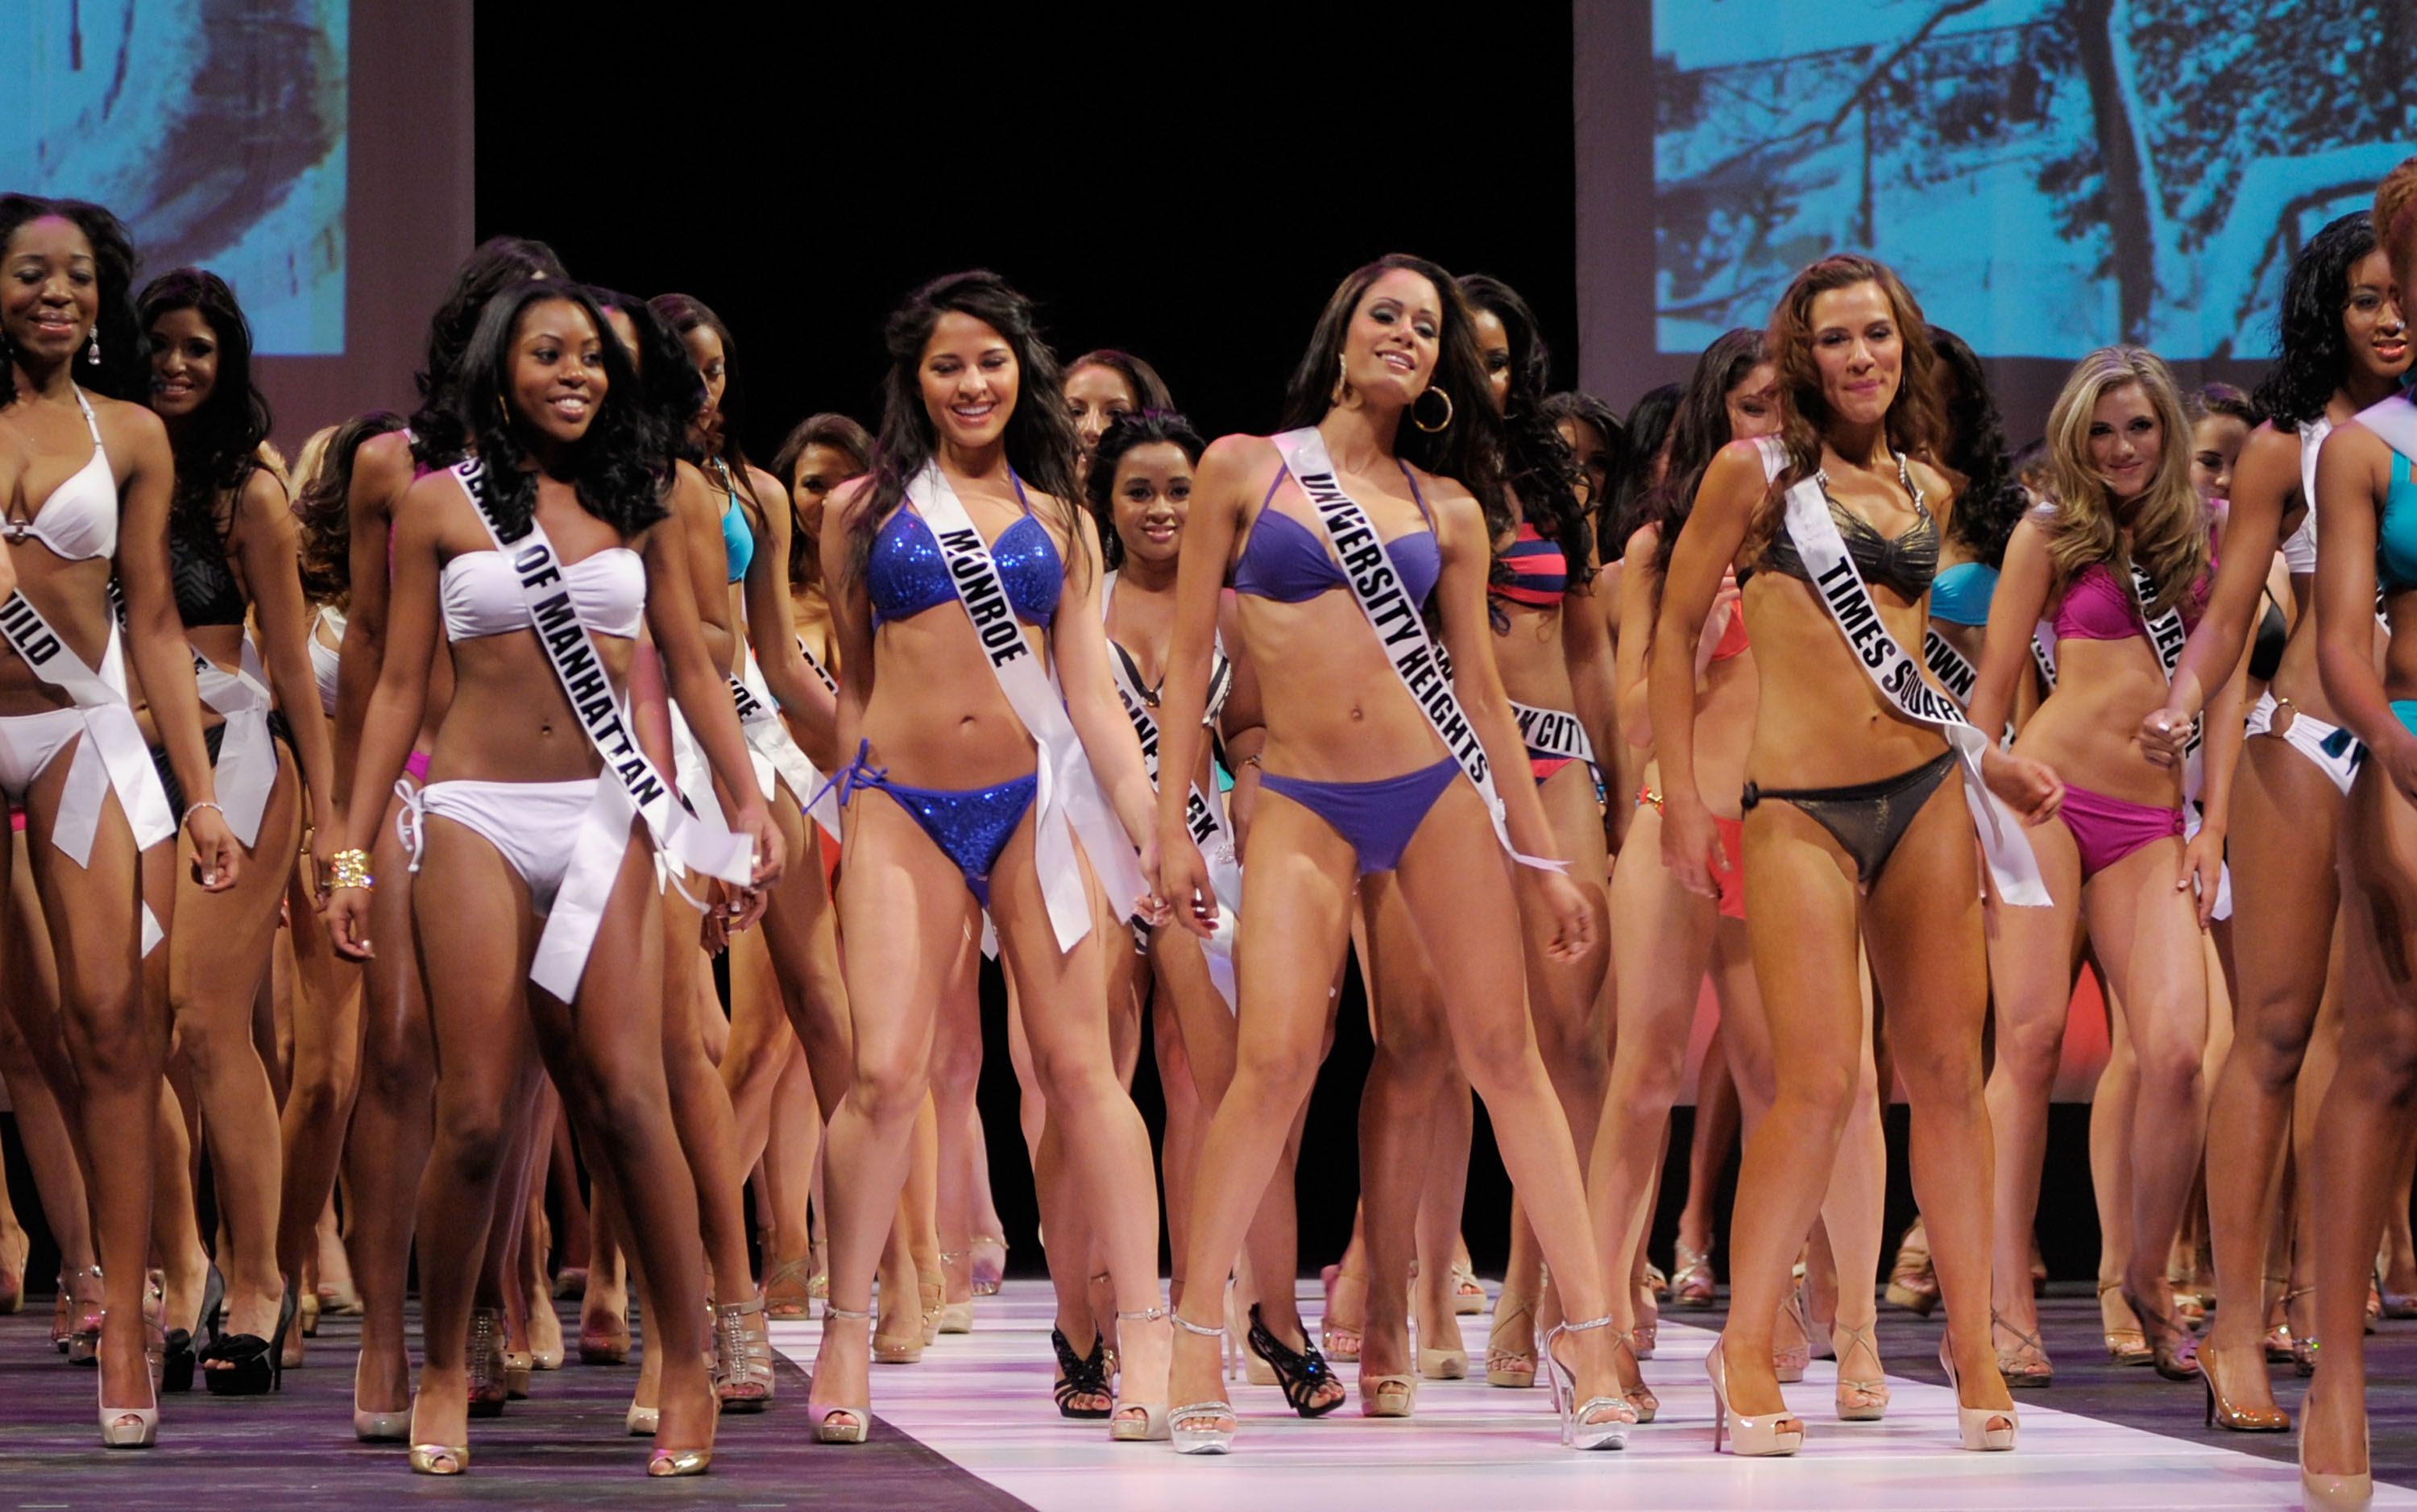 Miss Teen USA Gets Rid of Swimsuit Competition - Teen Beauty Pageant Ditche...